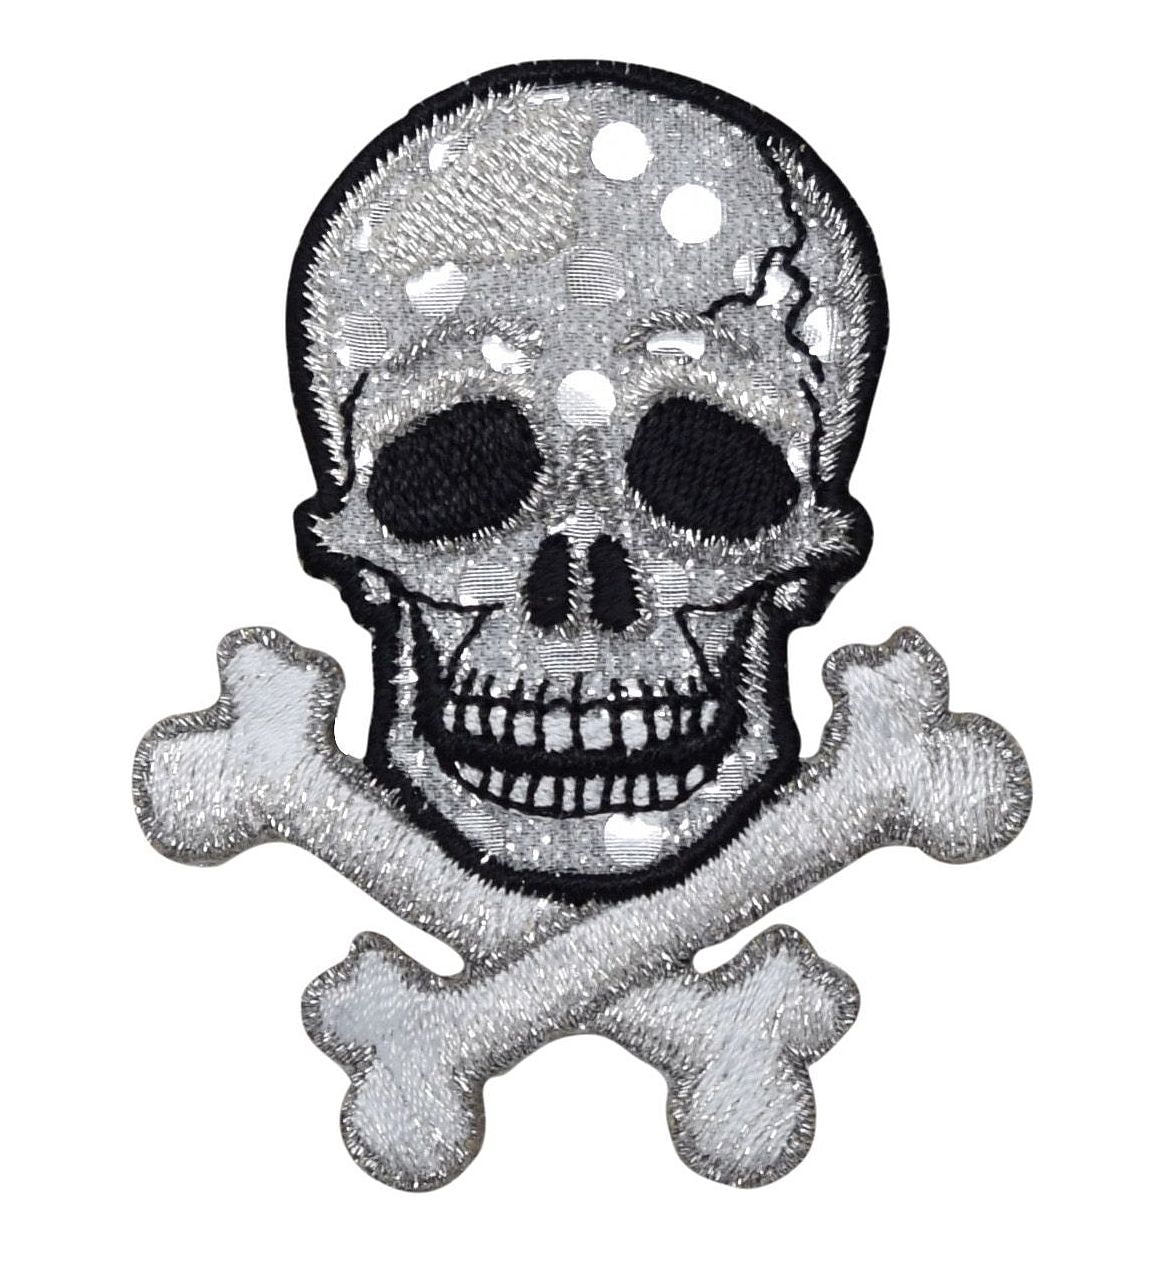 #2185IR Small Girl Skull Crossbone Skeleton Embroidered Sew Iron on Patch Badge 